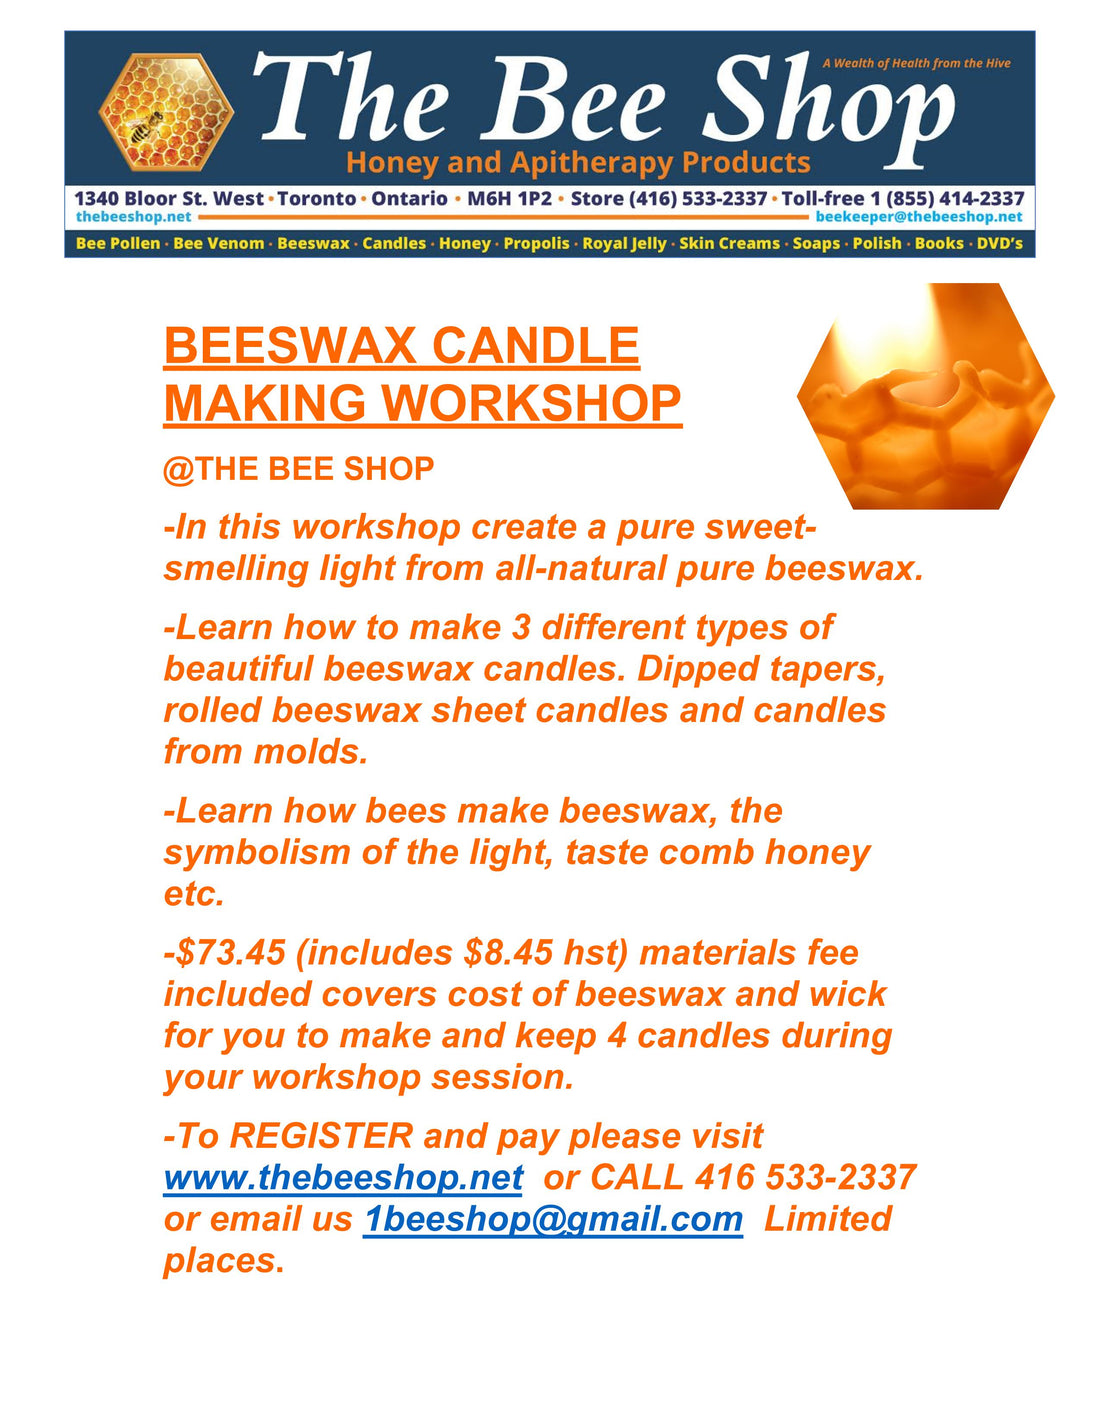 General information flyer for the beeswax candle making workshops held at The Bee Shop front view